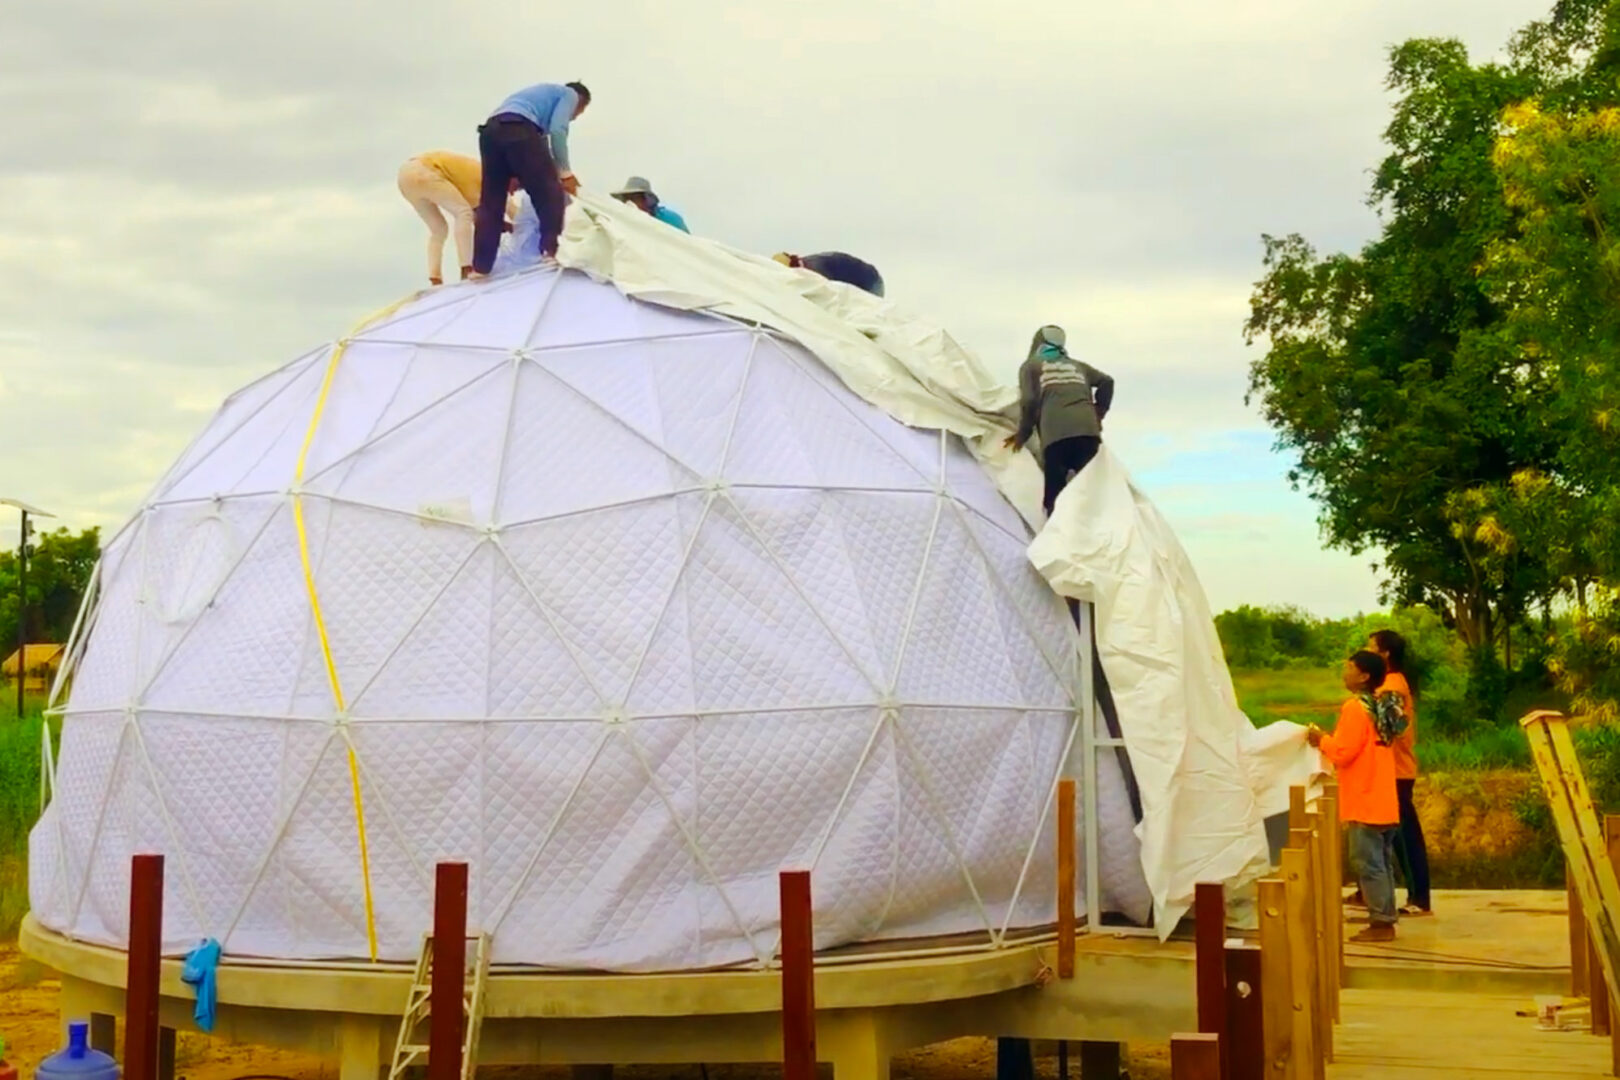 putting up the inner insulation and external pvc lining on a 7m dome tent at Nakara Villas & Glamping